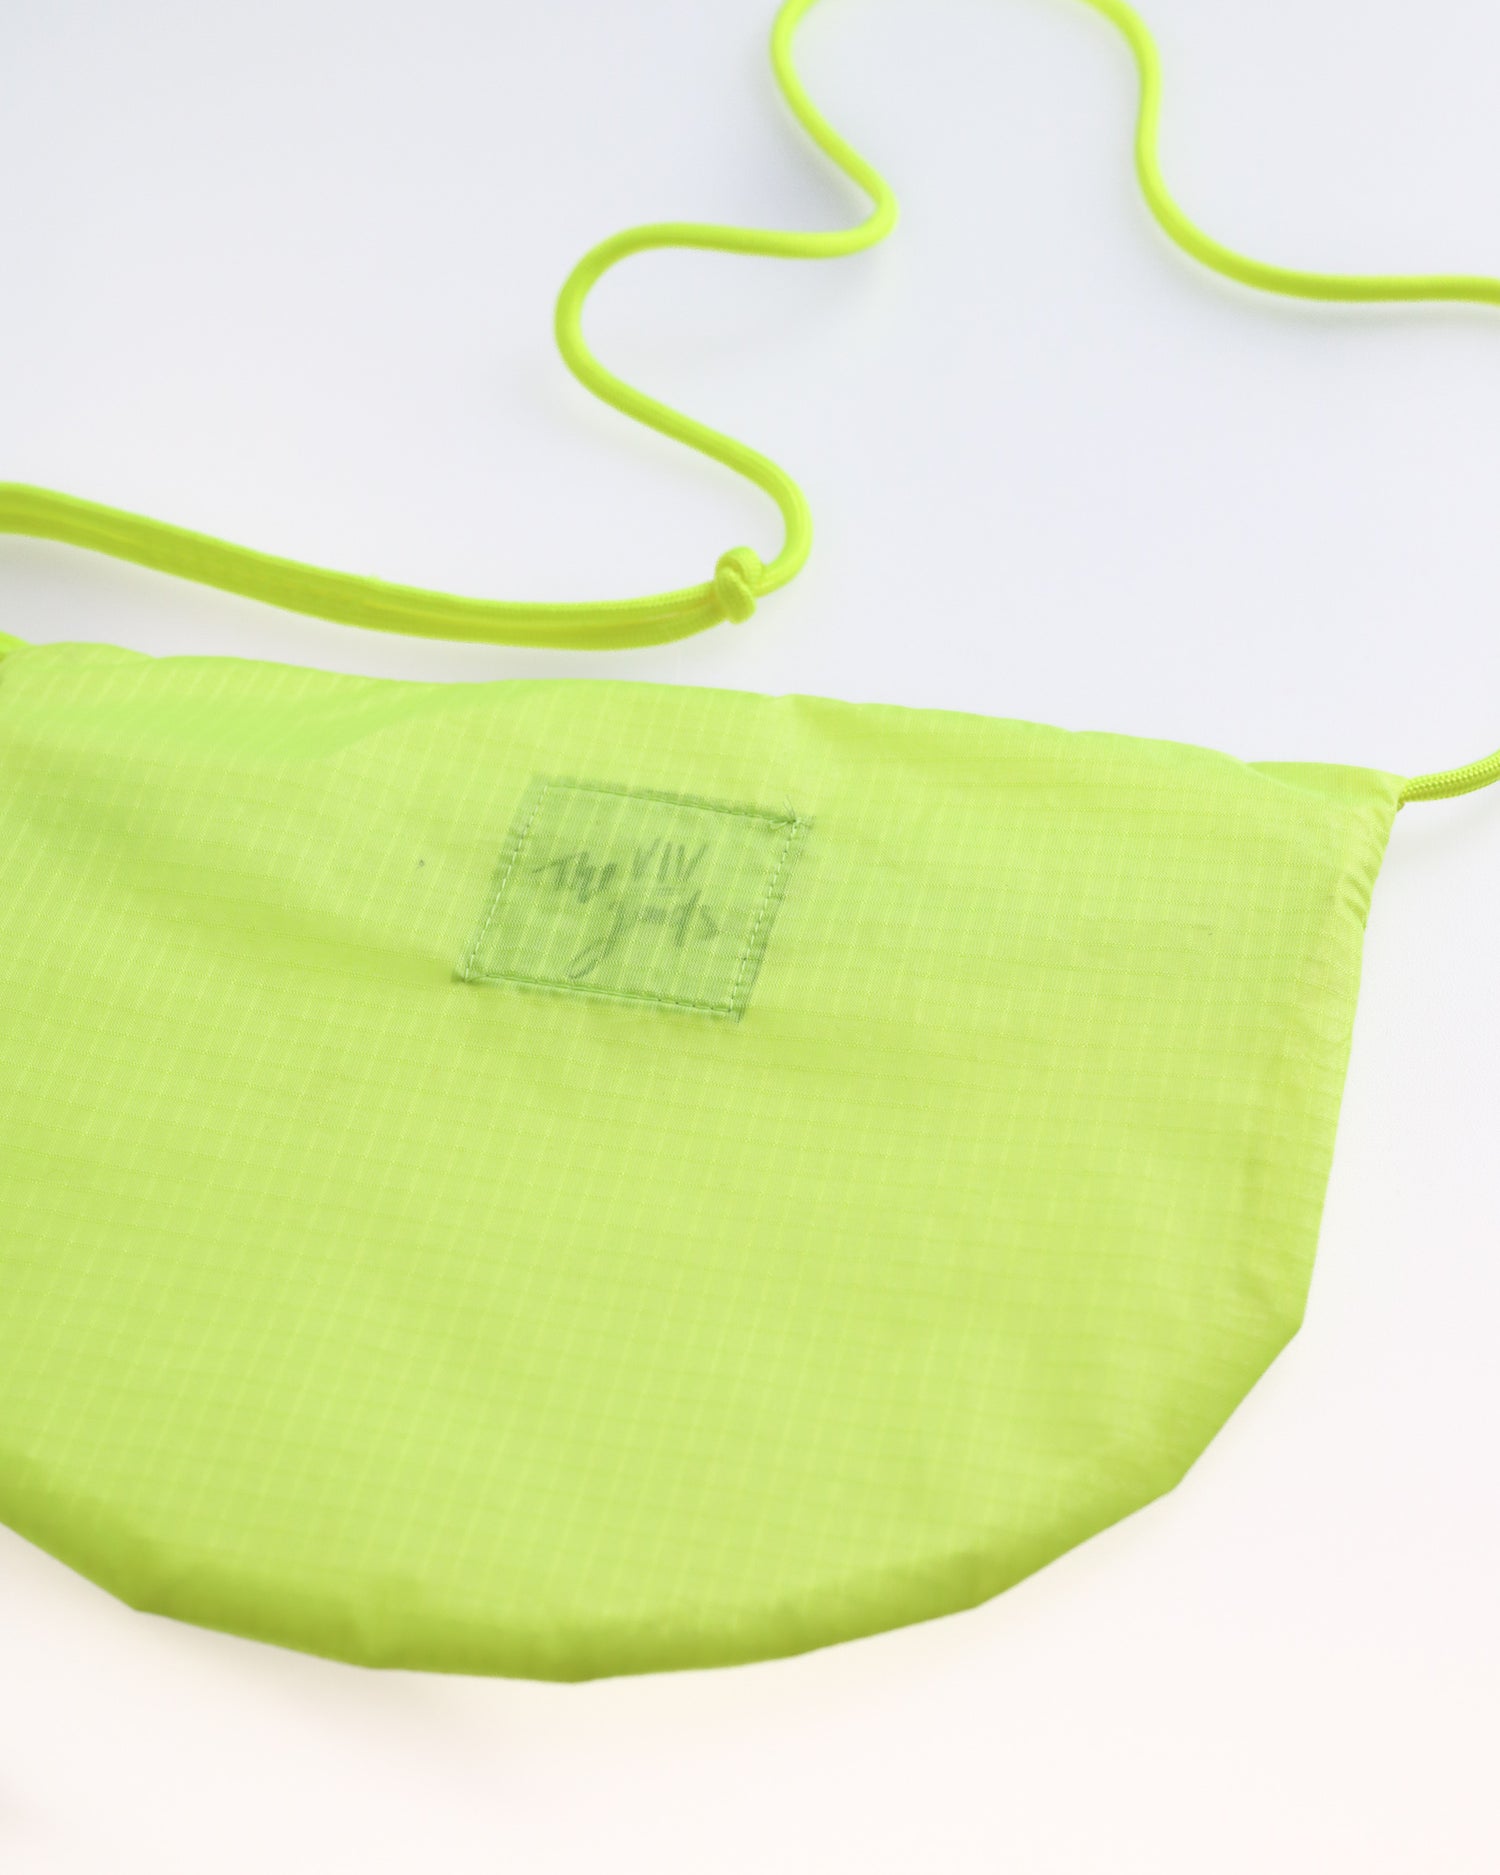 neon yellow cross body bag flat lay shown from back made from vintage paraglider